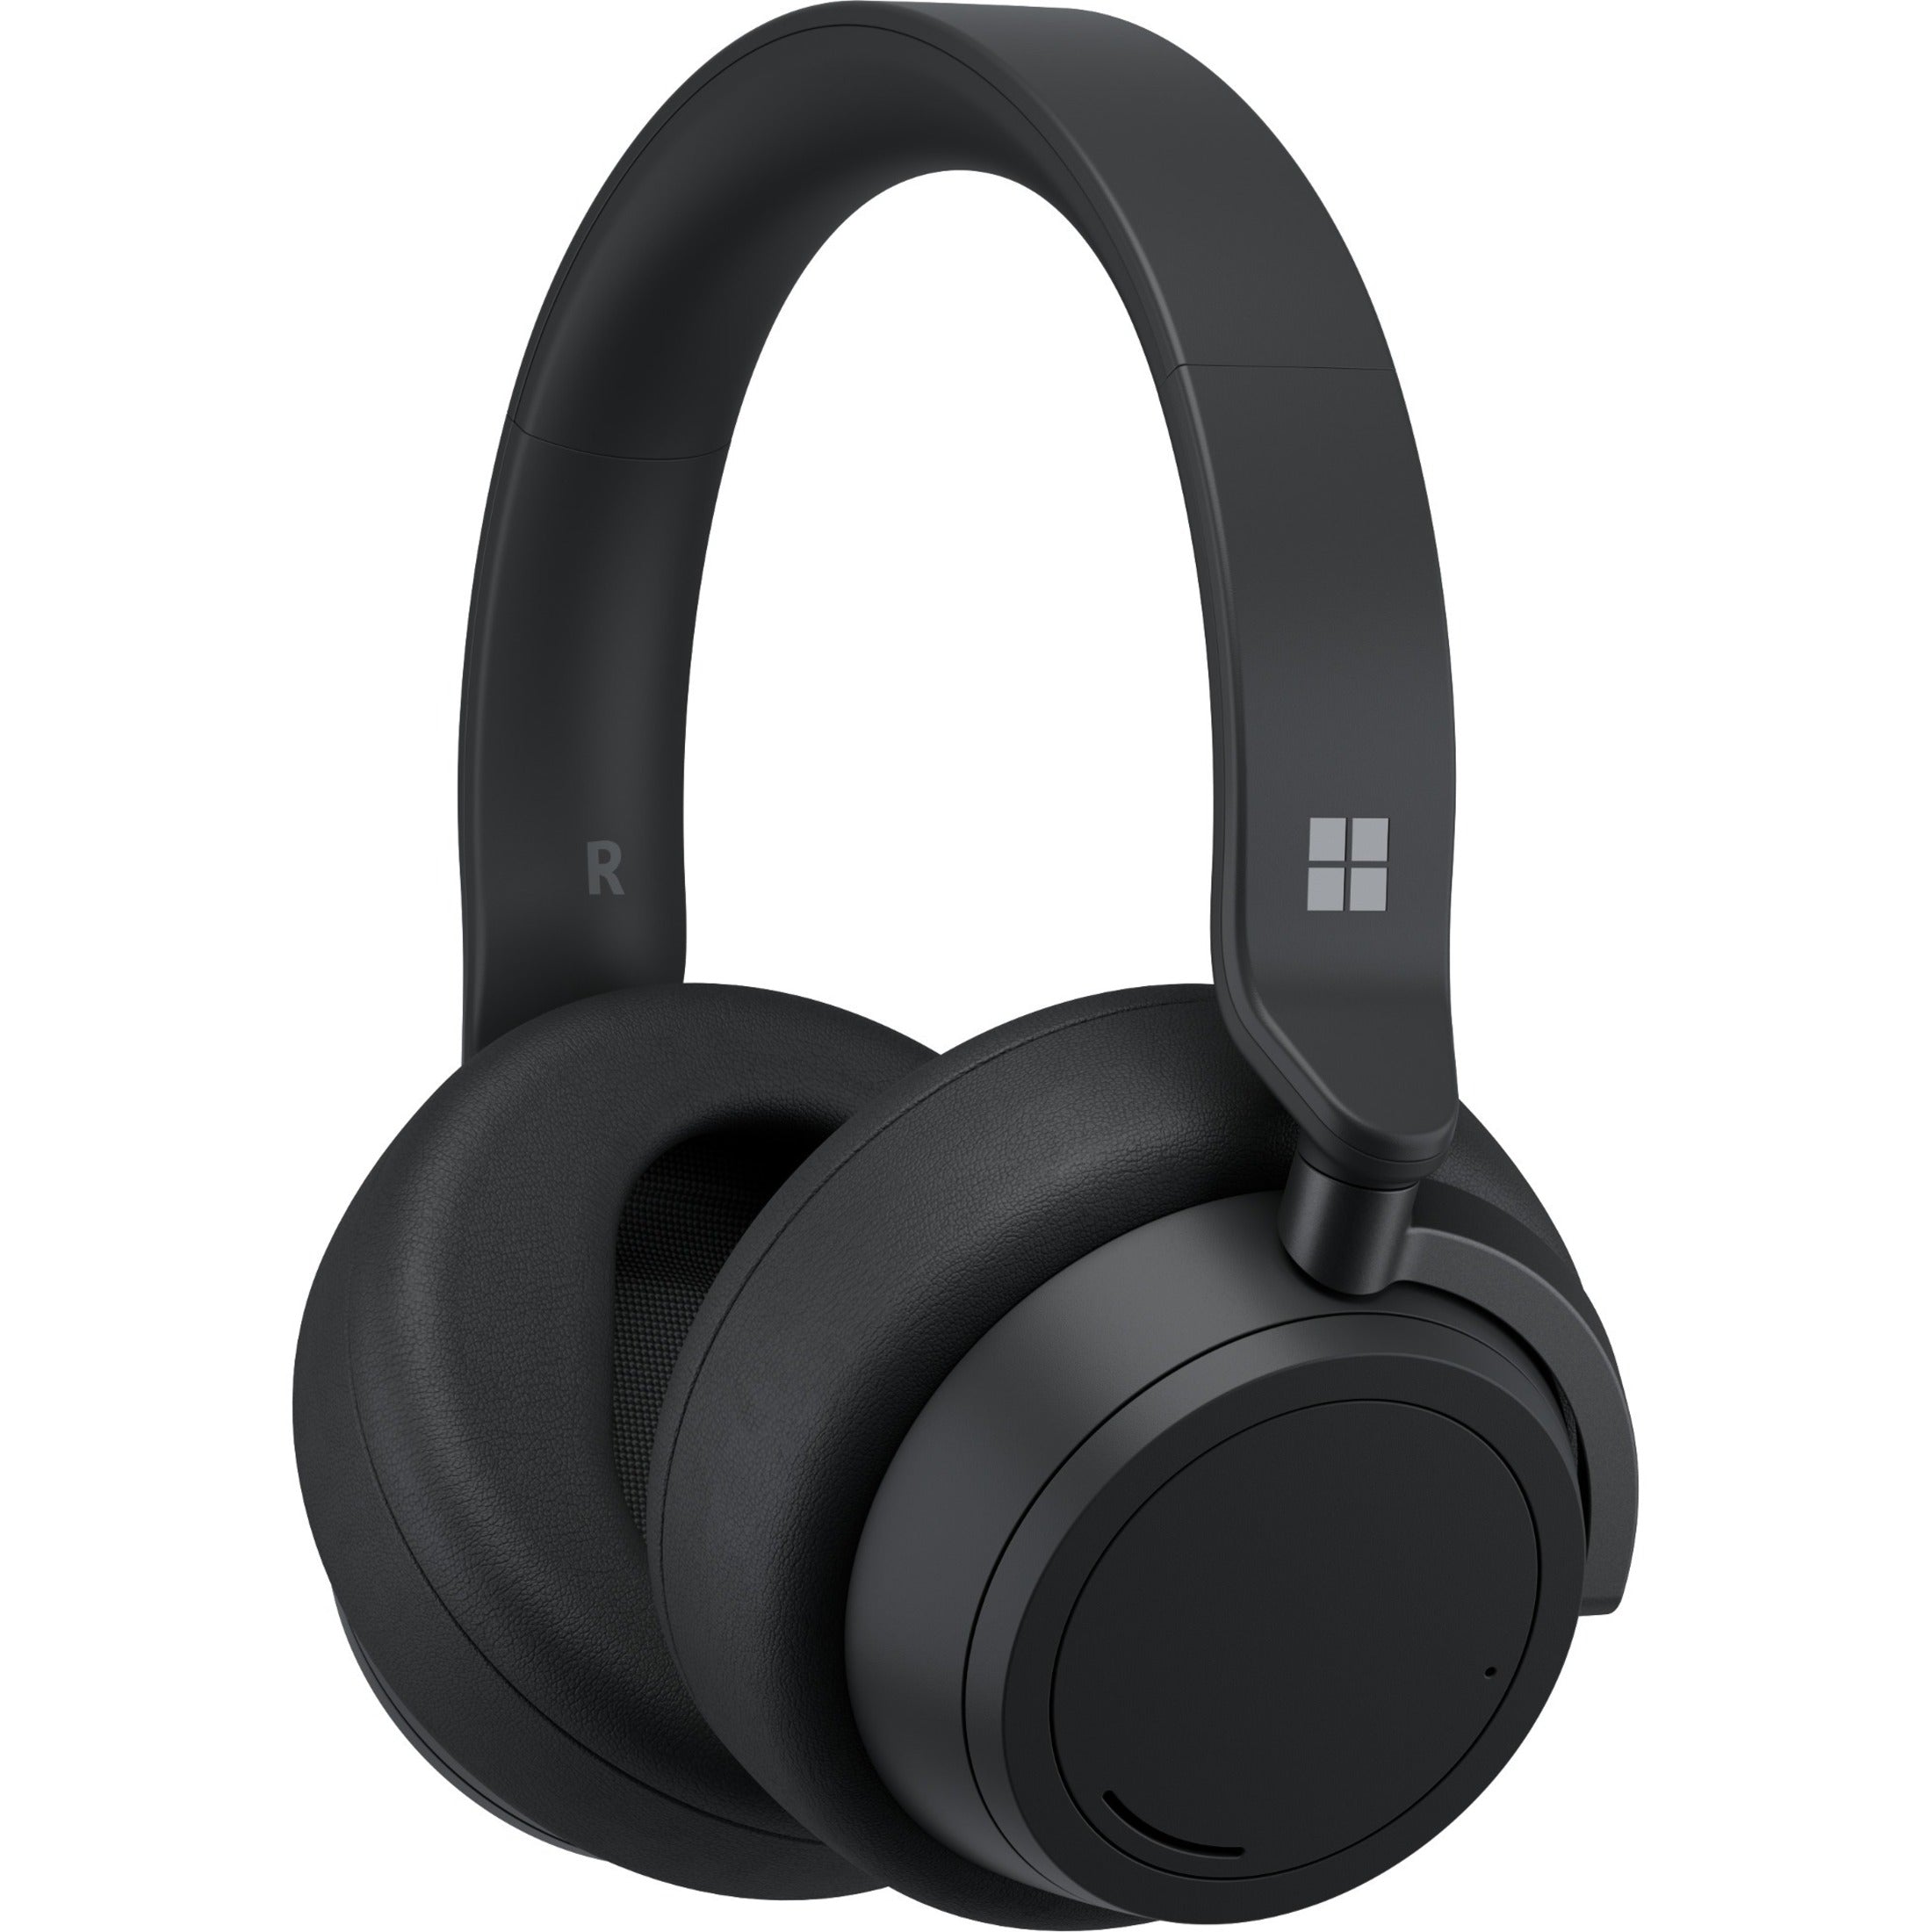 Microsoft QUZ-00001 Surface Headphones 2, Wireless Bluetooth Headset with Active Noise Cancellation